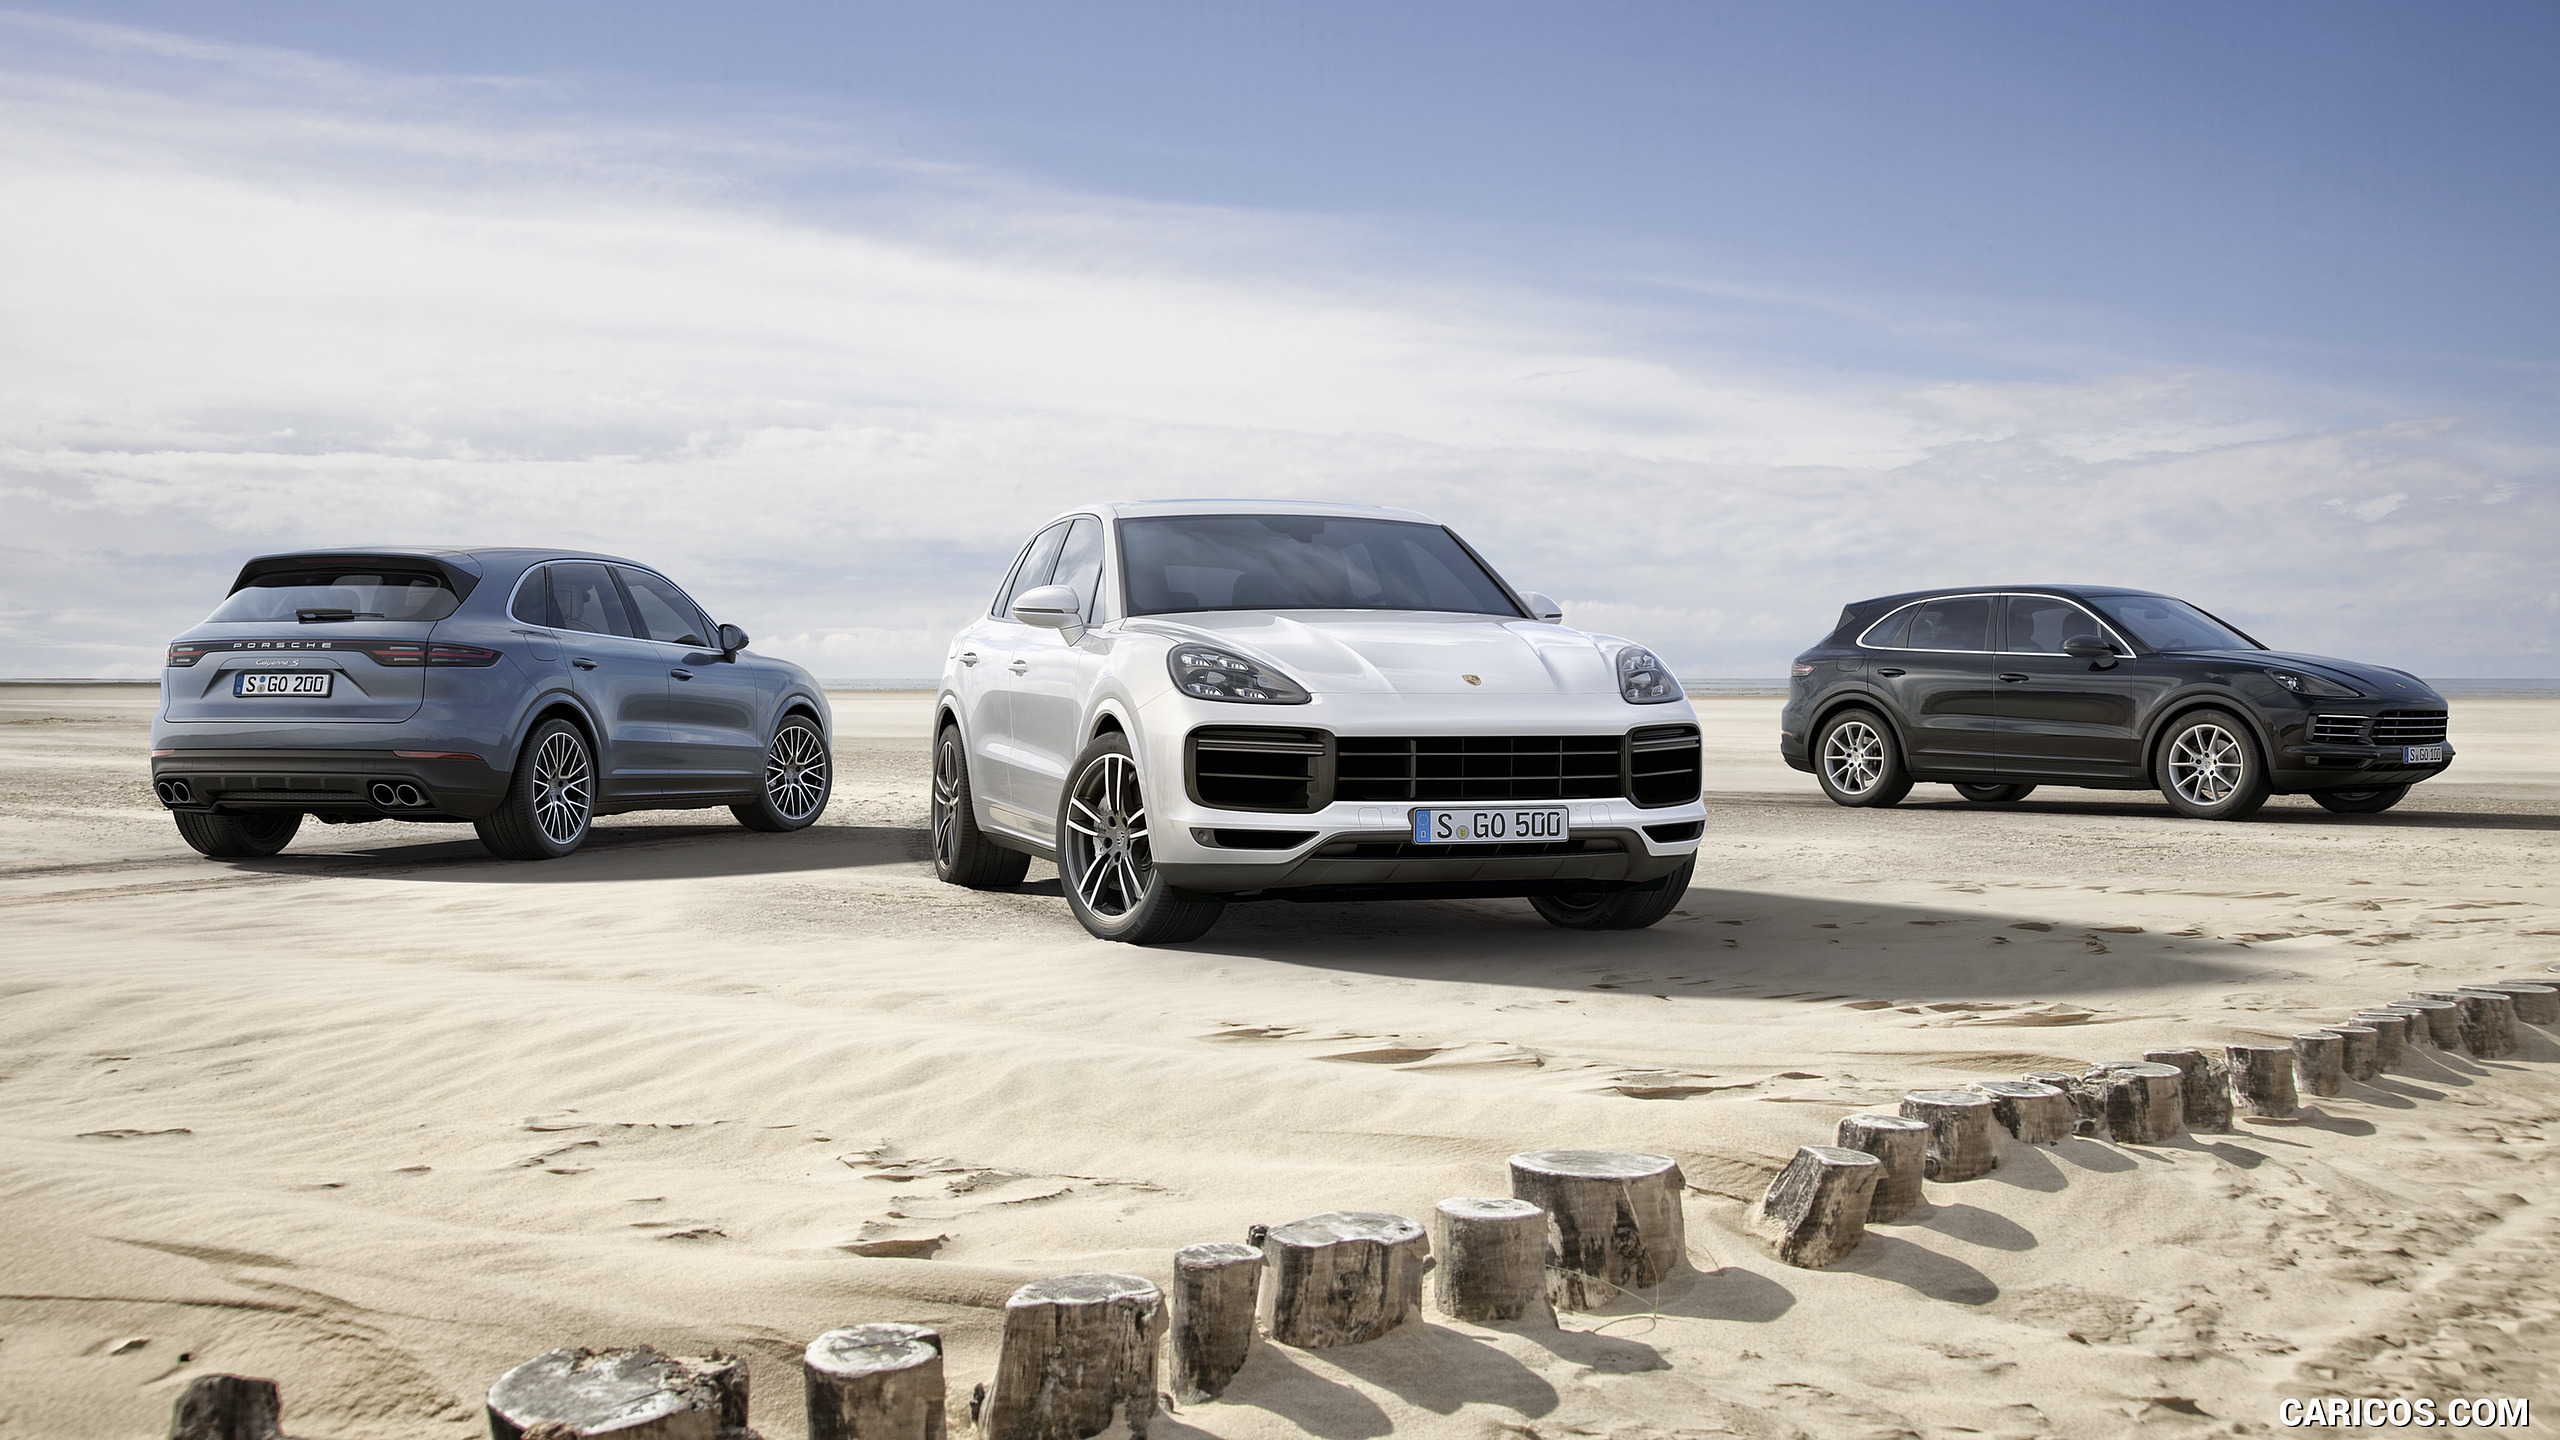 Porsche Cayenne Turbo And Family HD Wallpaper